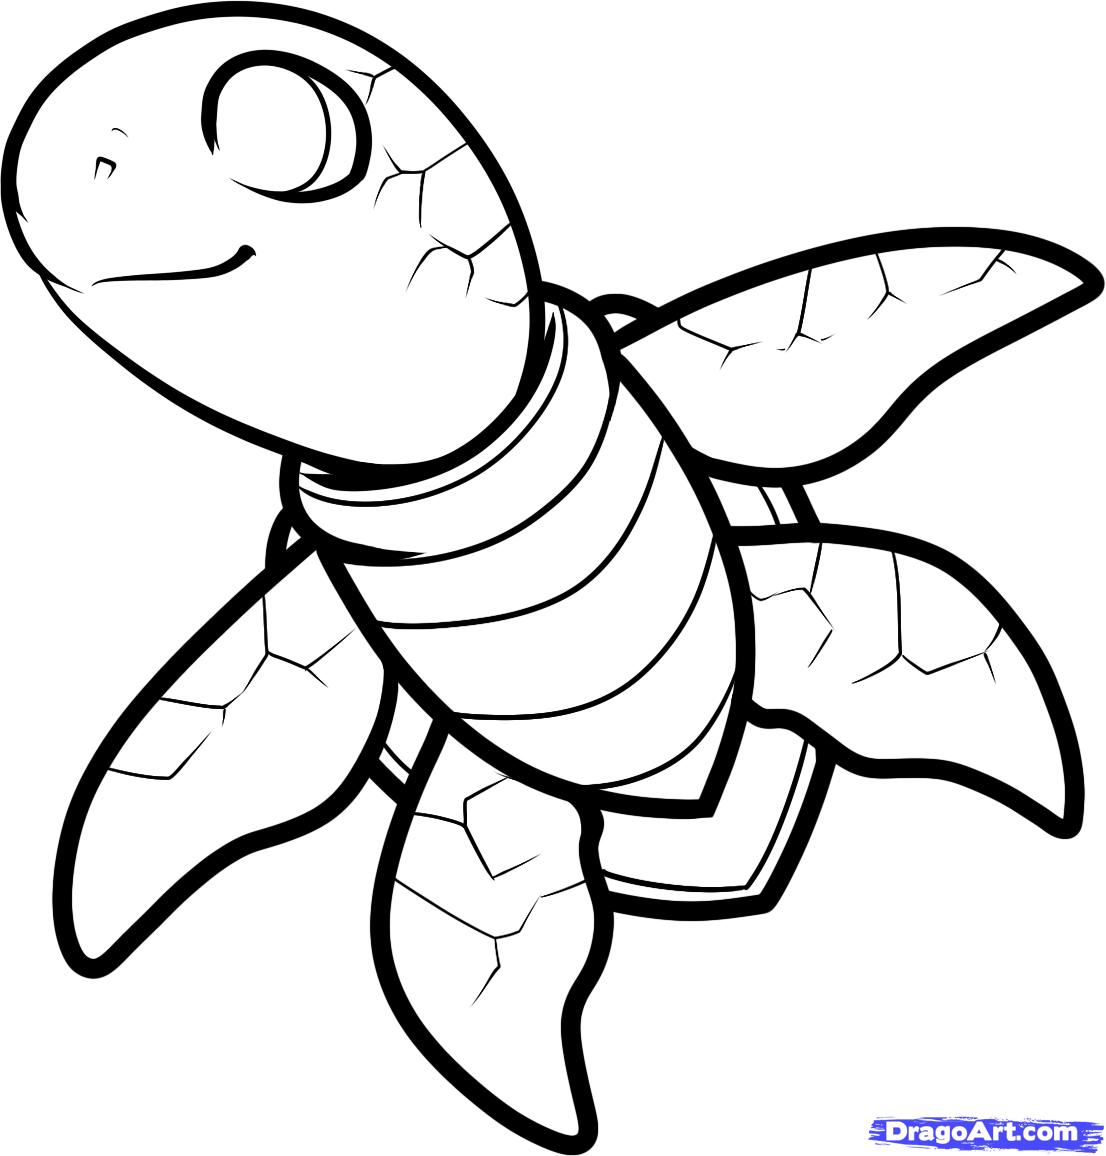 How to draw a sea turtle cartoon sea turtle step by step clip art